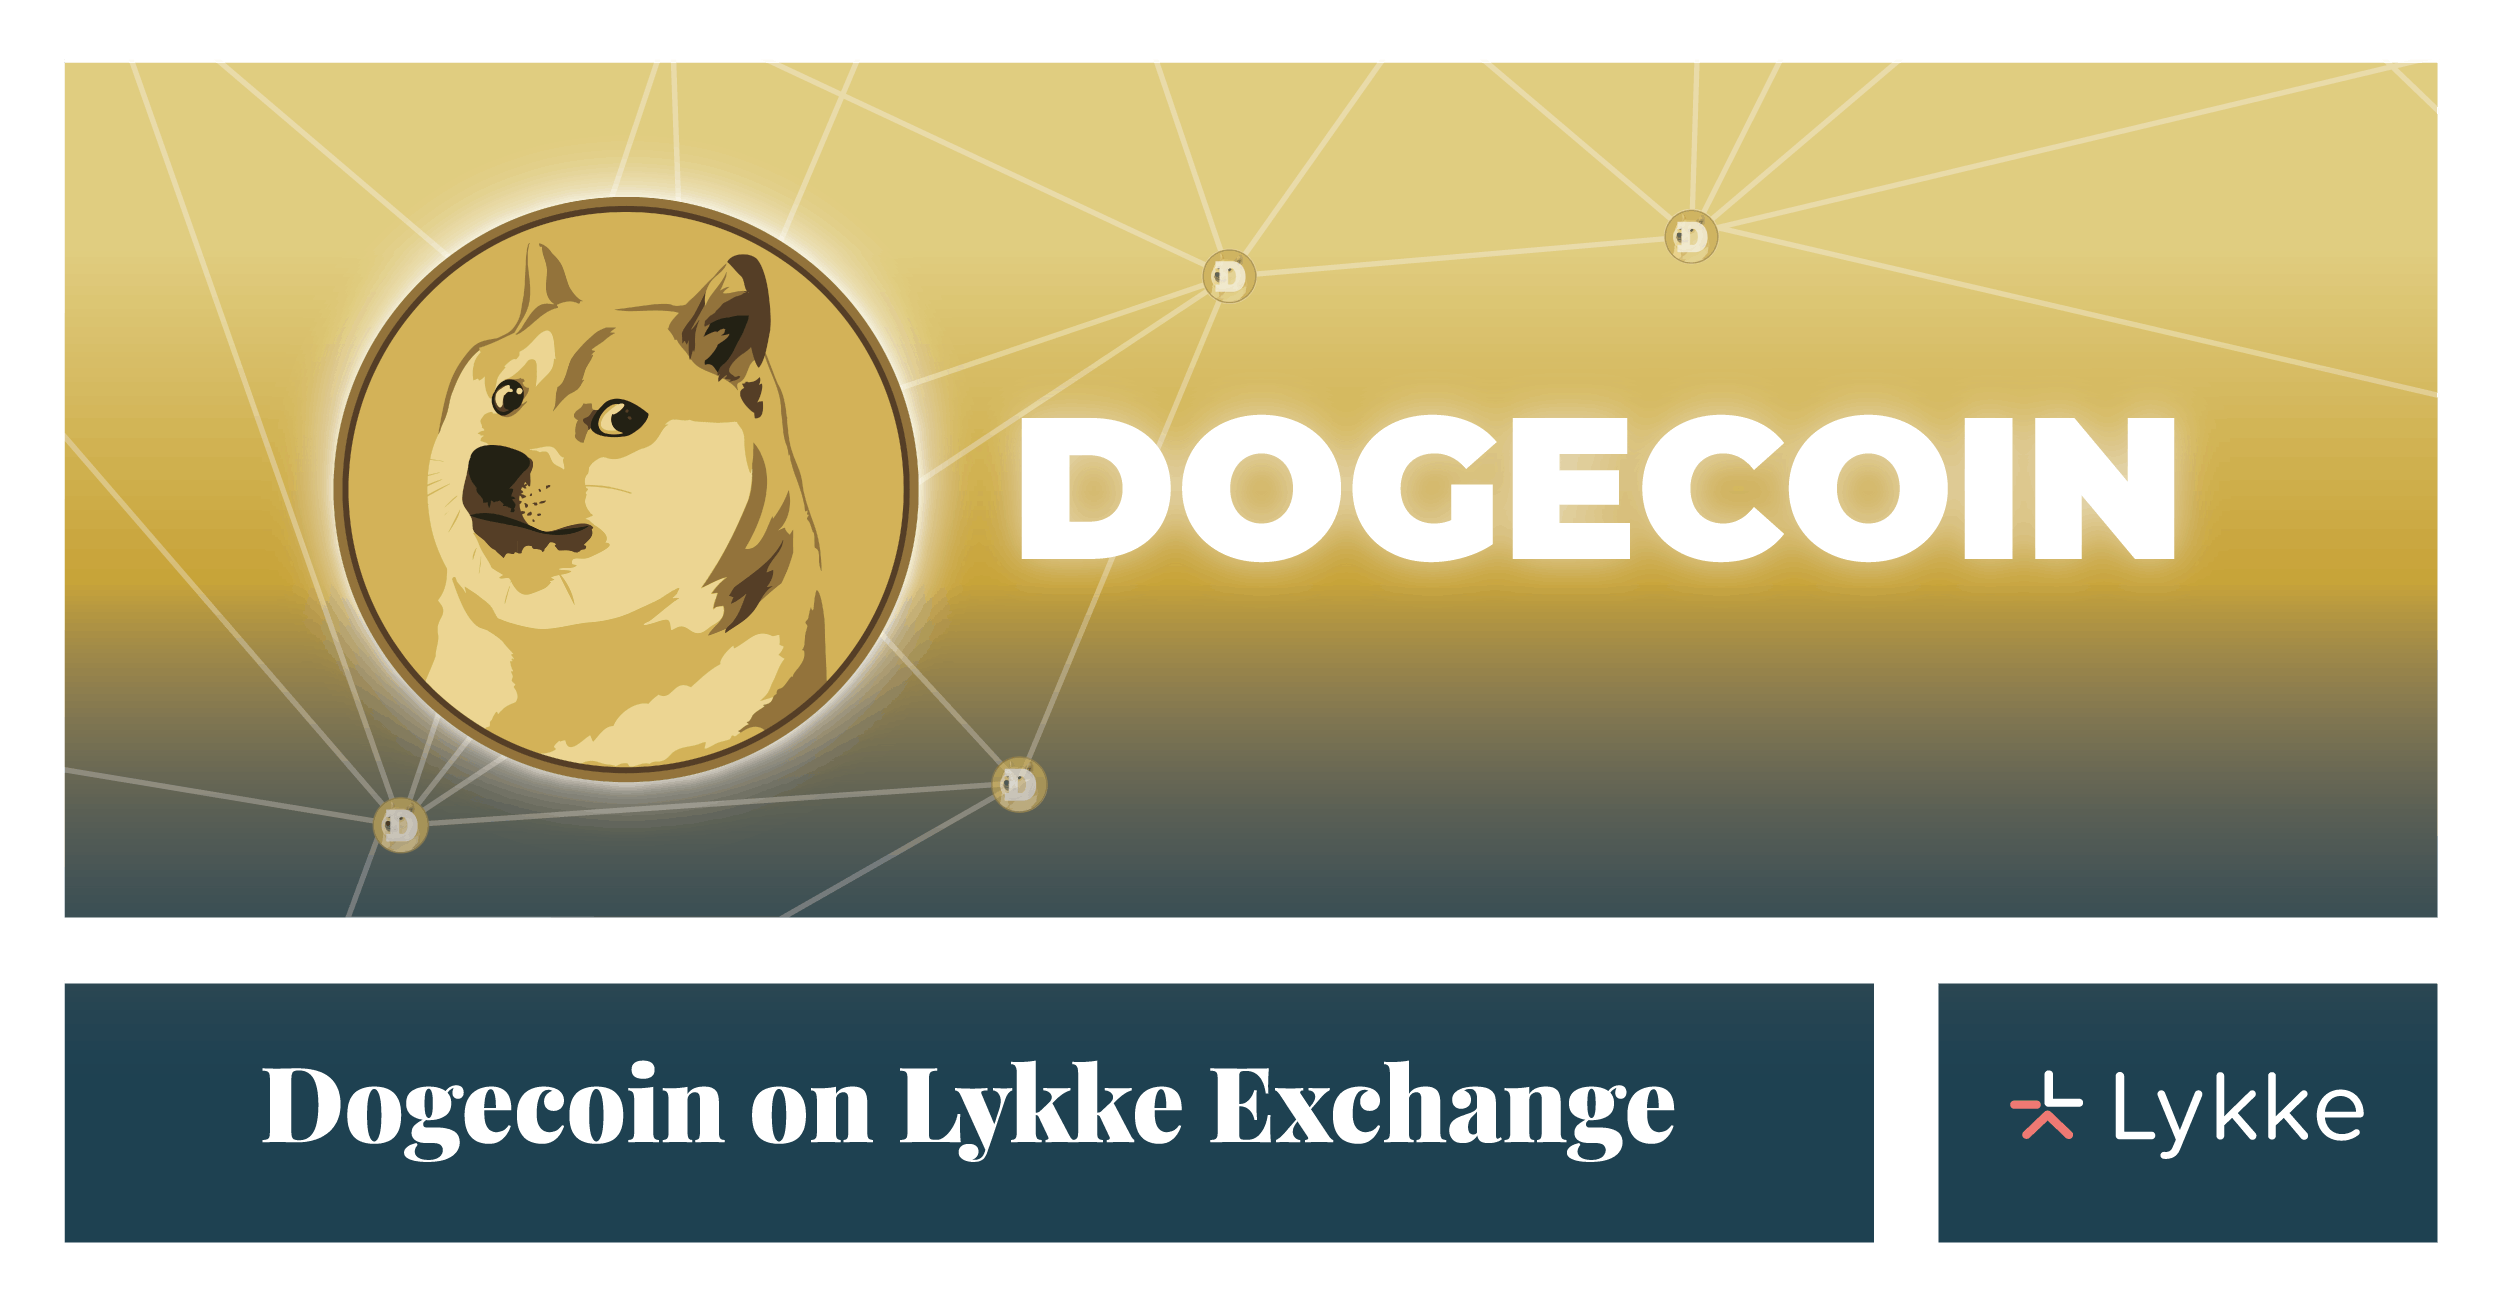 Lykke allows to trade dogecoin without fees